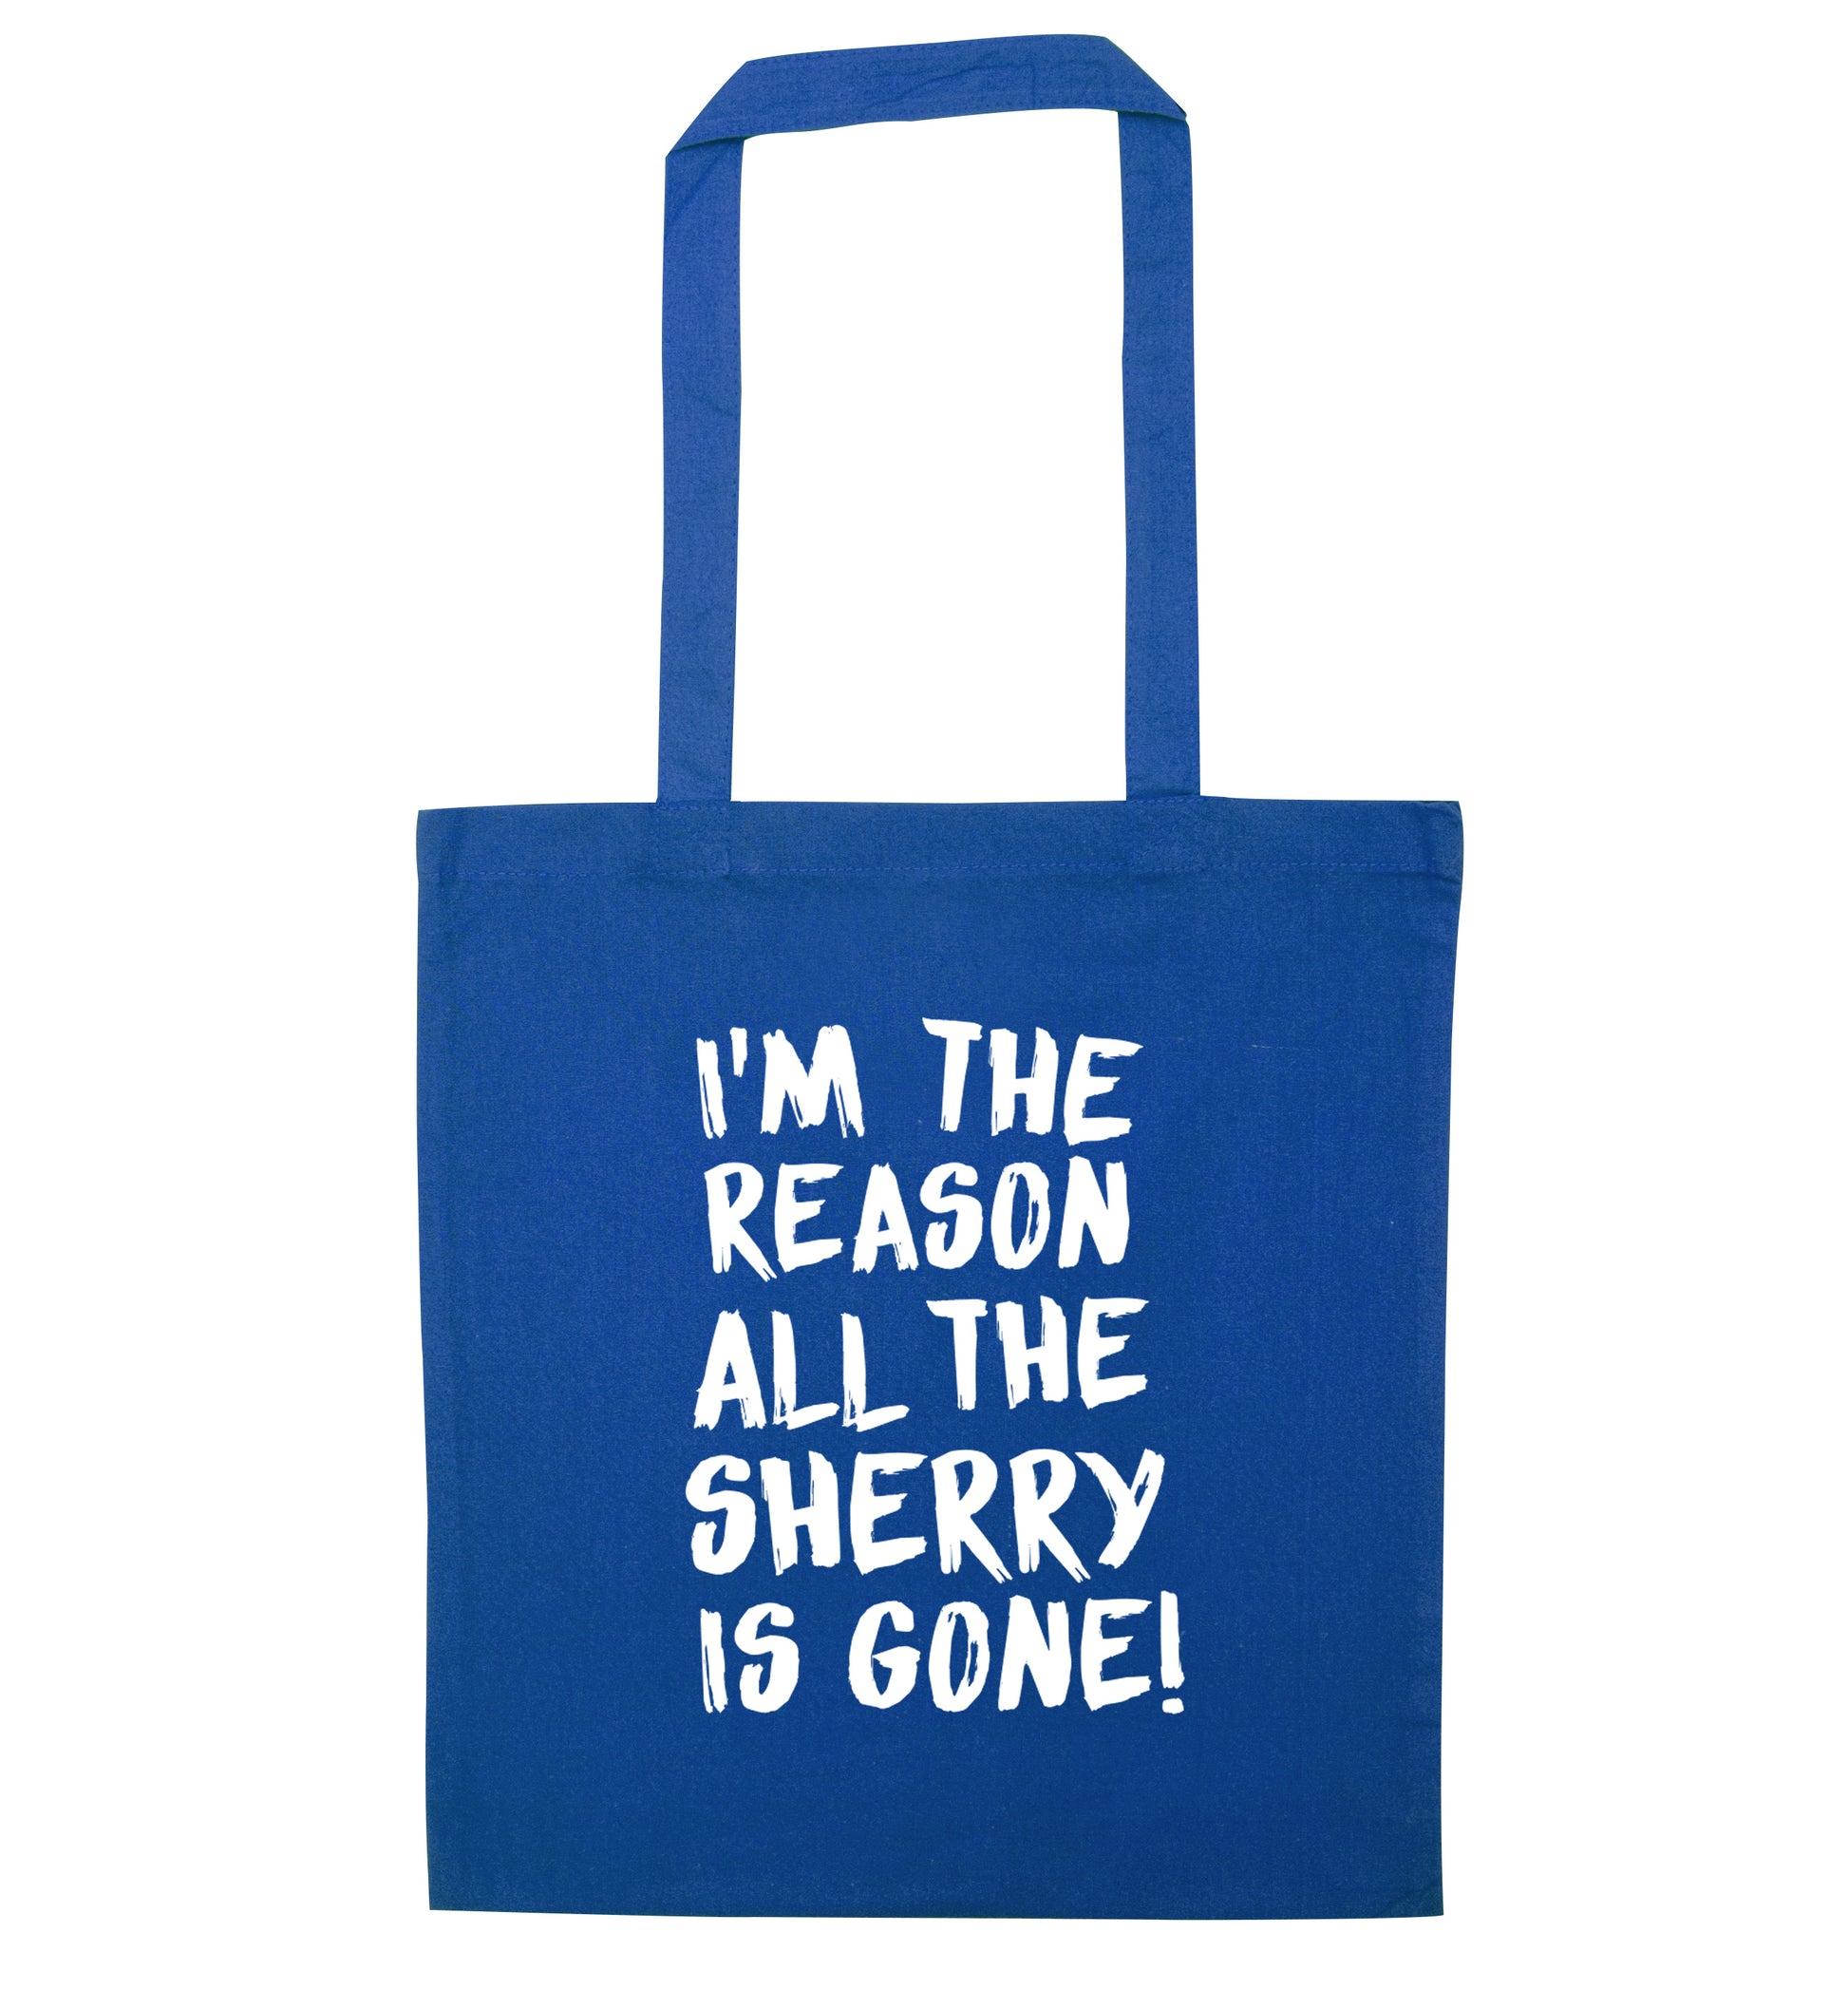 I'm the reason all the sherry is gone blue tote bag